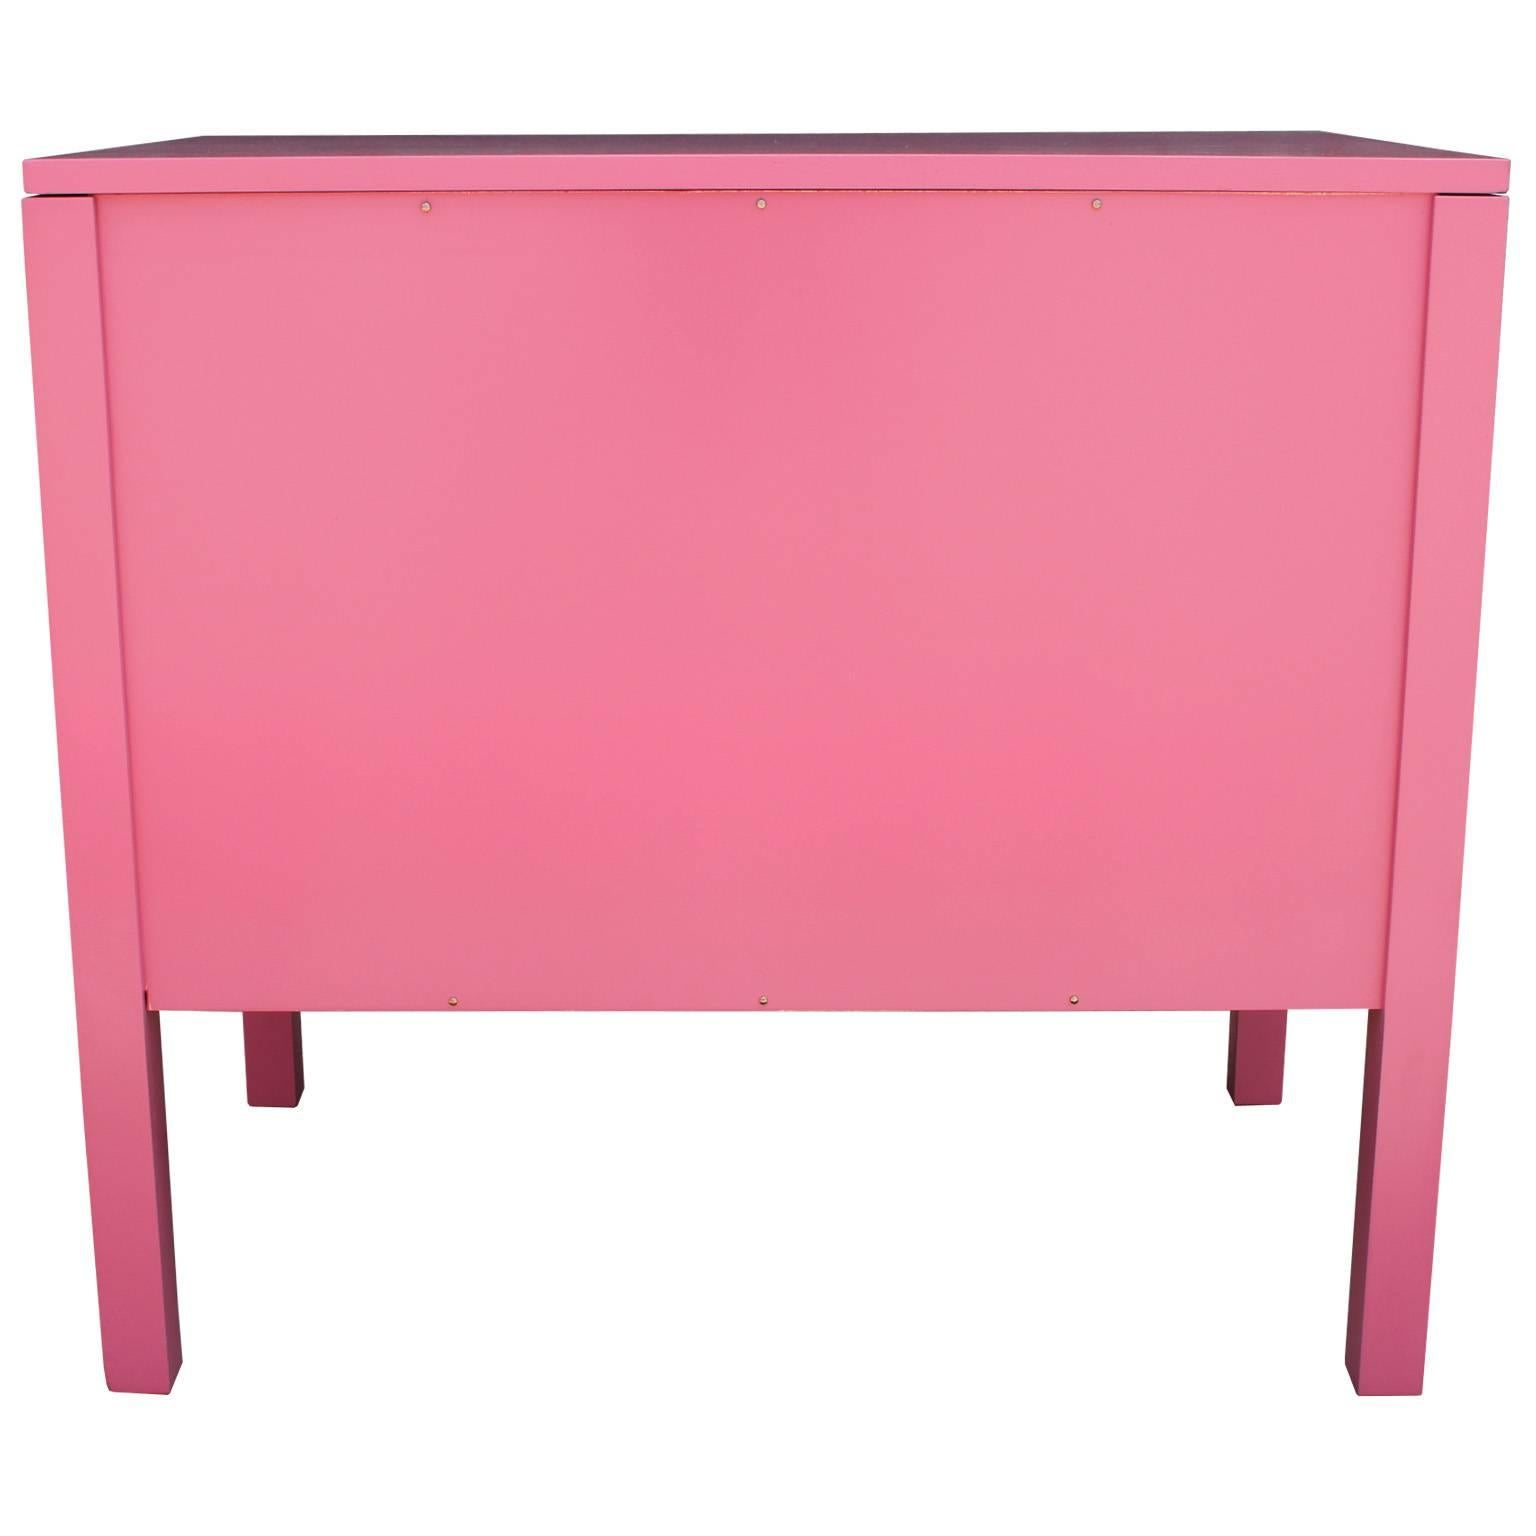 Mid-20th Century Lovely Pair of Modern Bachelor's Three Drawer Chests Lacquered in Pink